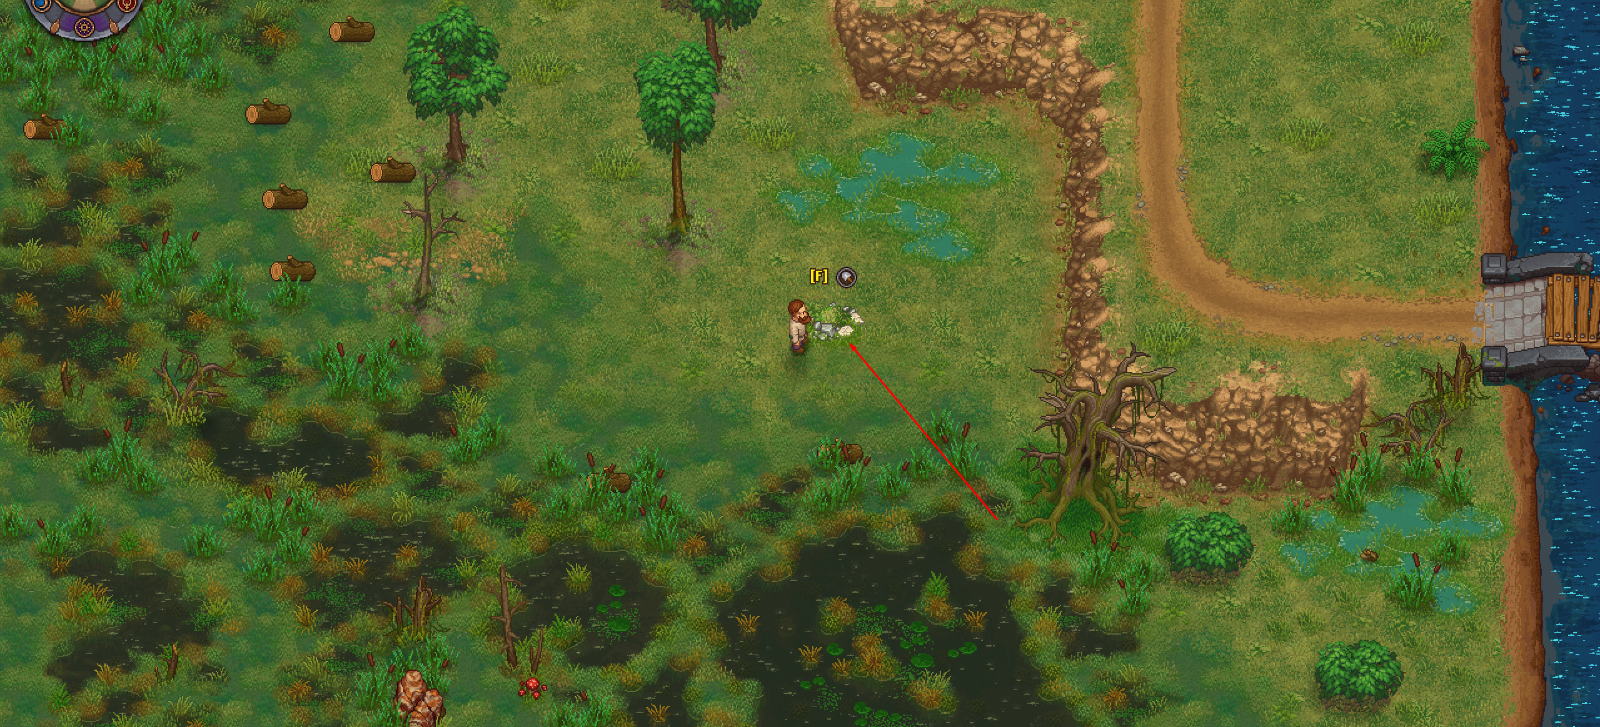 graveyard keeper items for snake quest